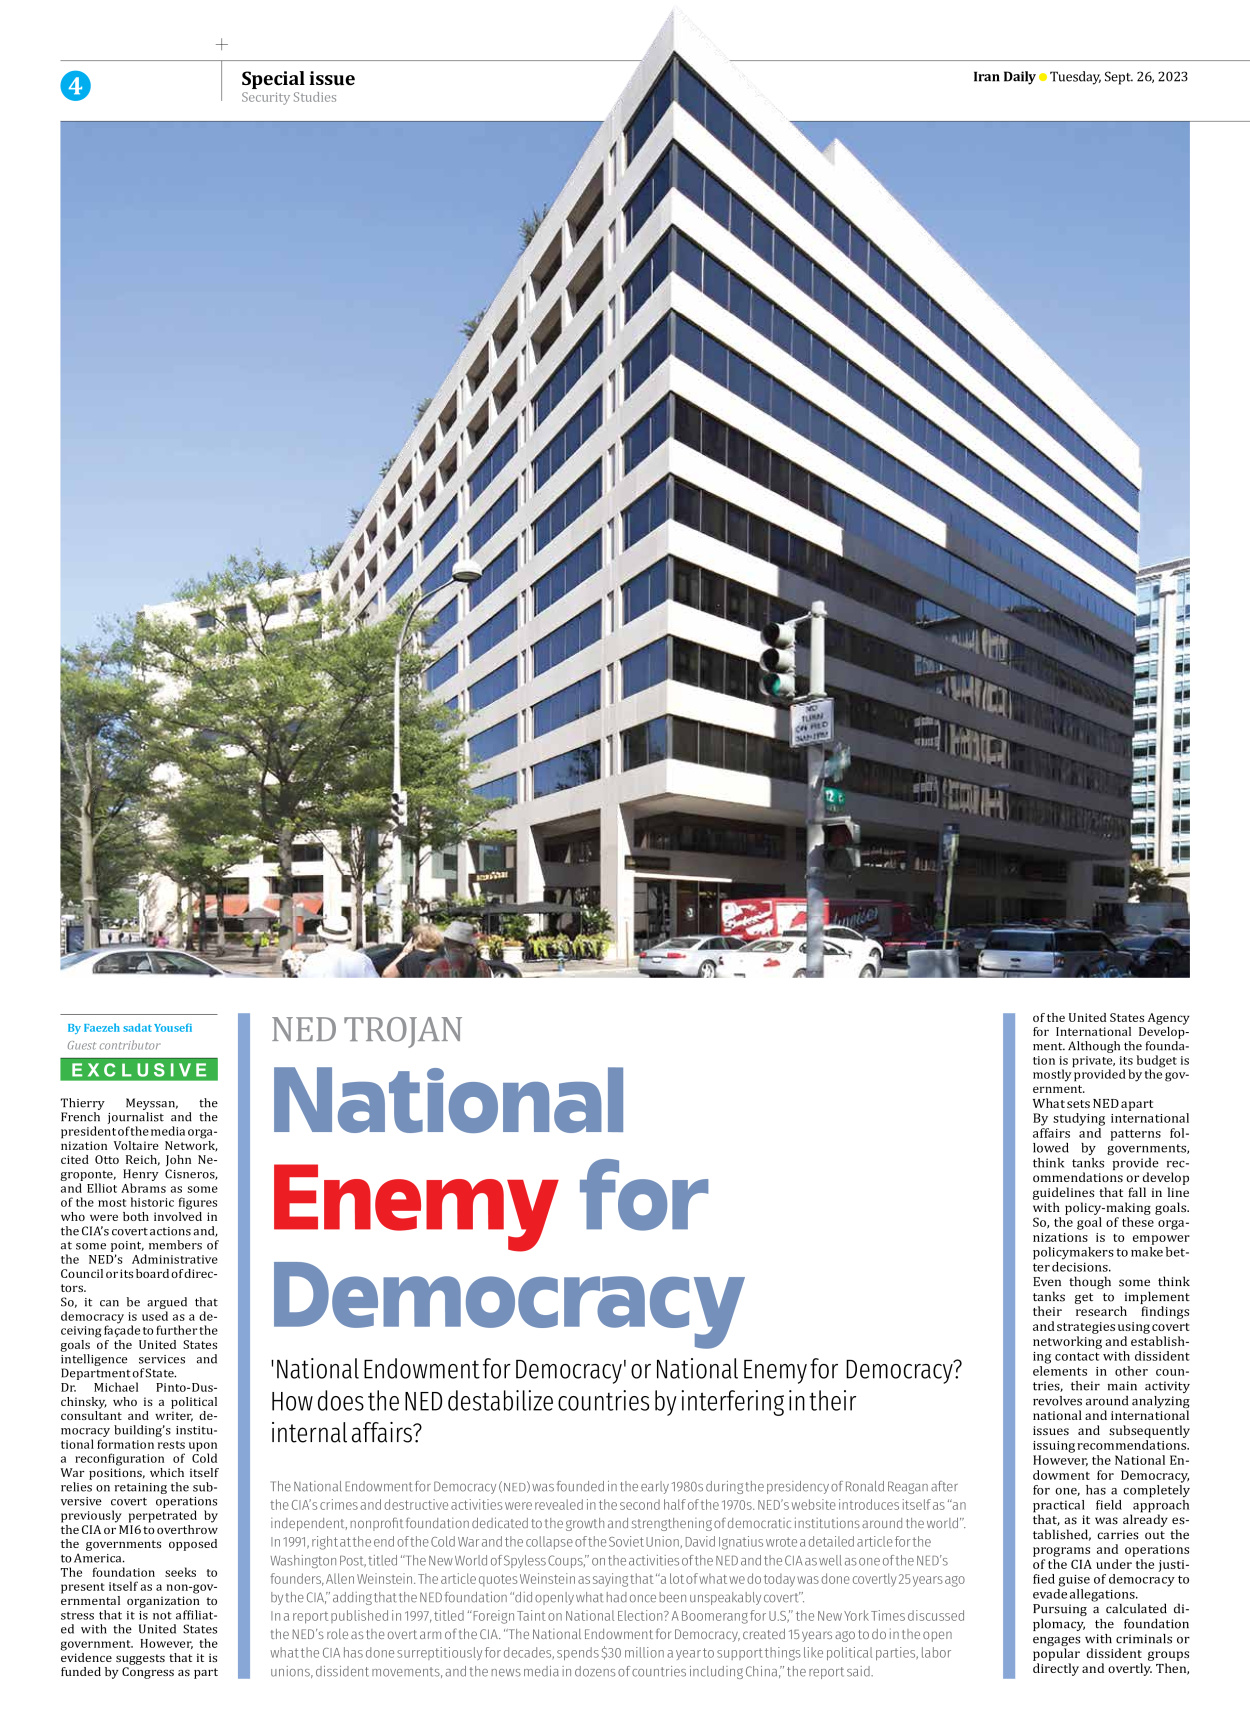 Iran Daily - Number Seven Thousand Three Hundred and Ninety Three - 26 September 2023 - Page 4